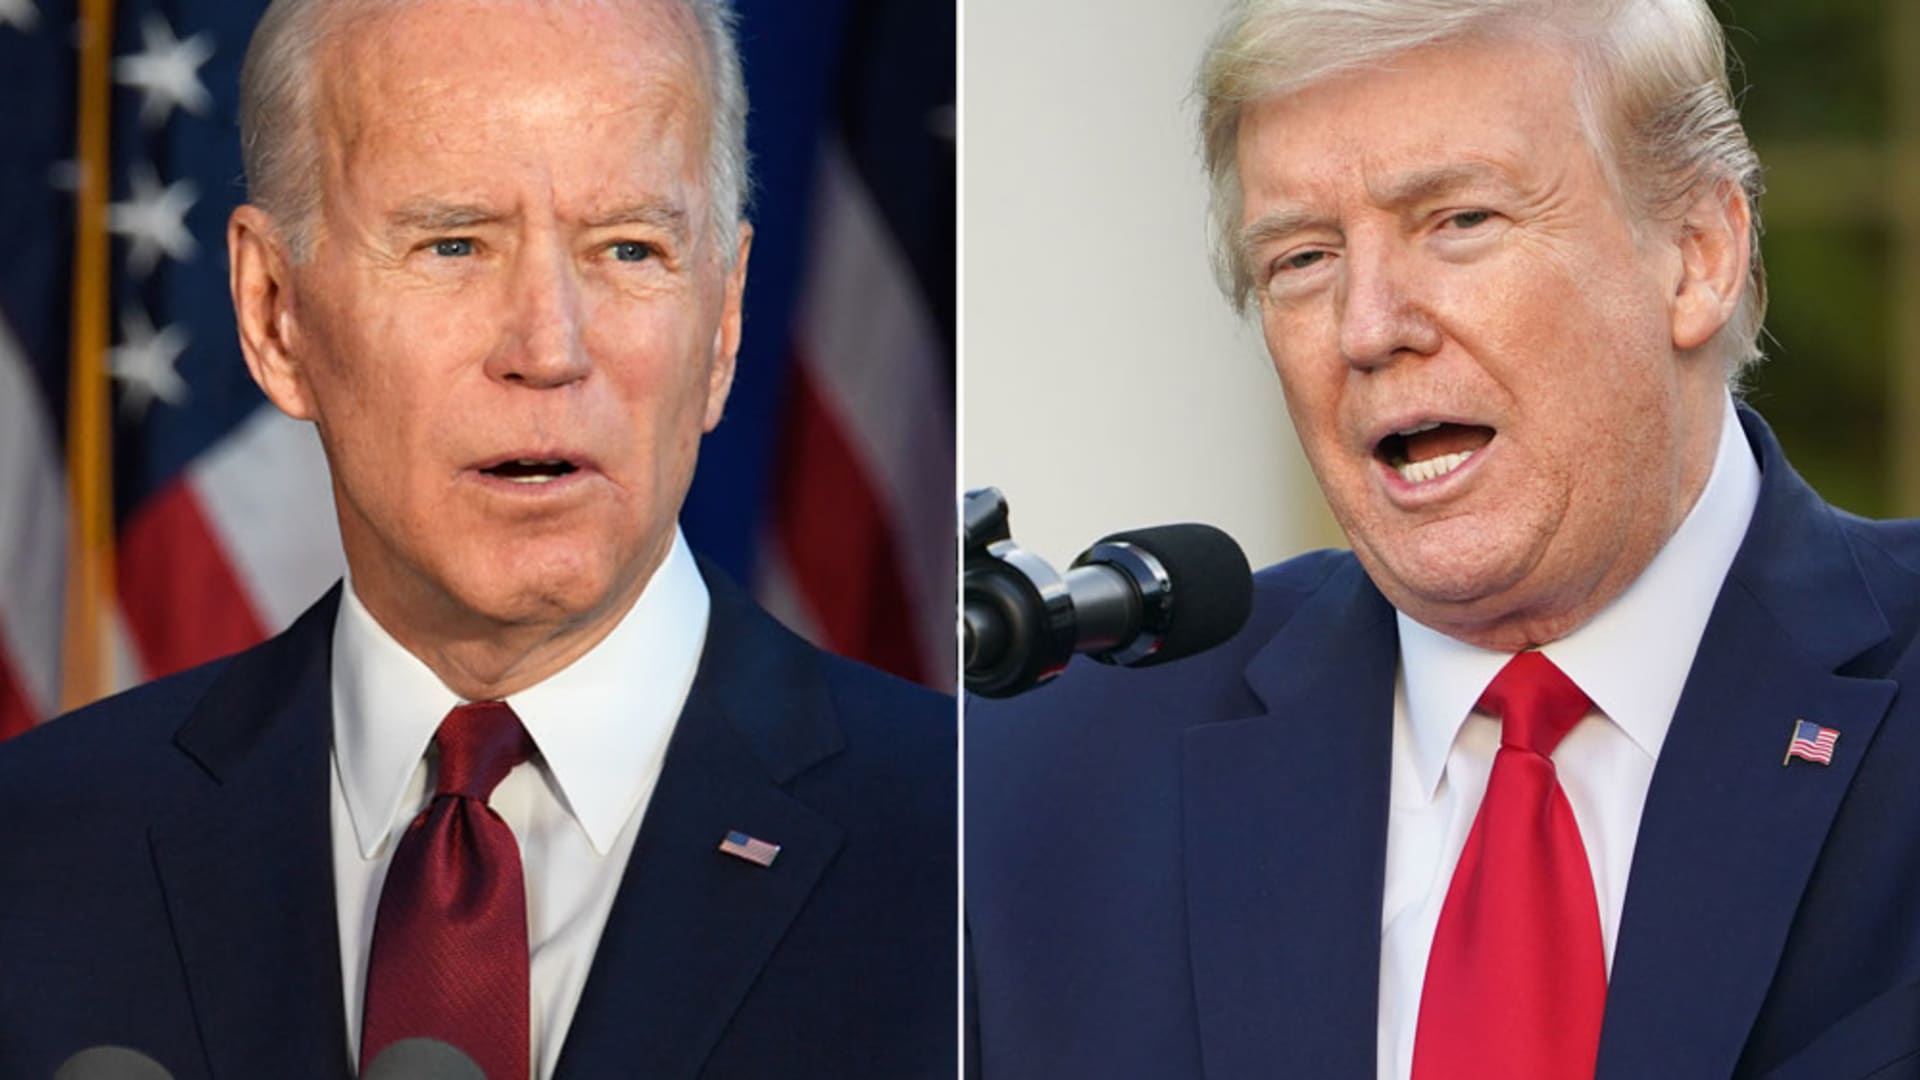 Most voters don't see Trump and Biden as mentally fit to be president, new poll shows